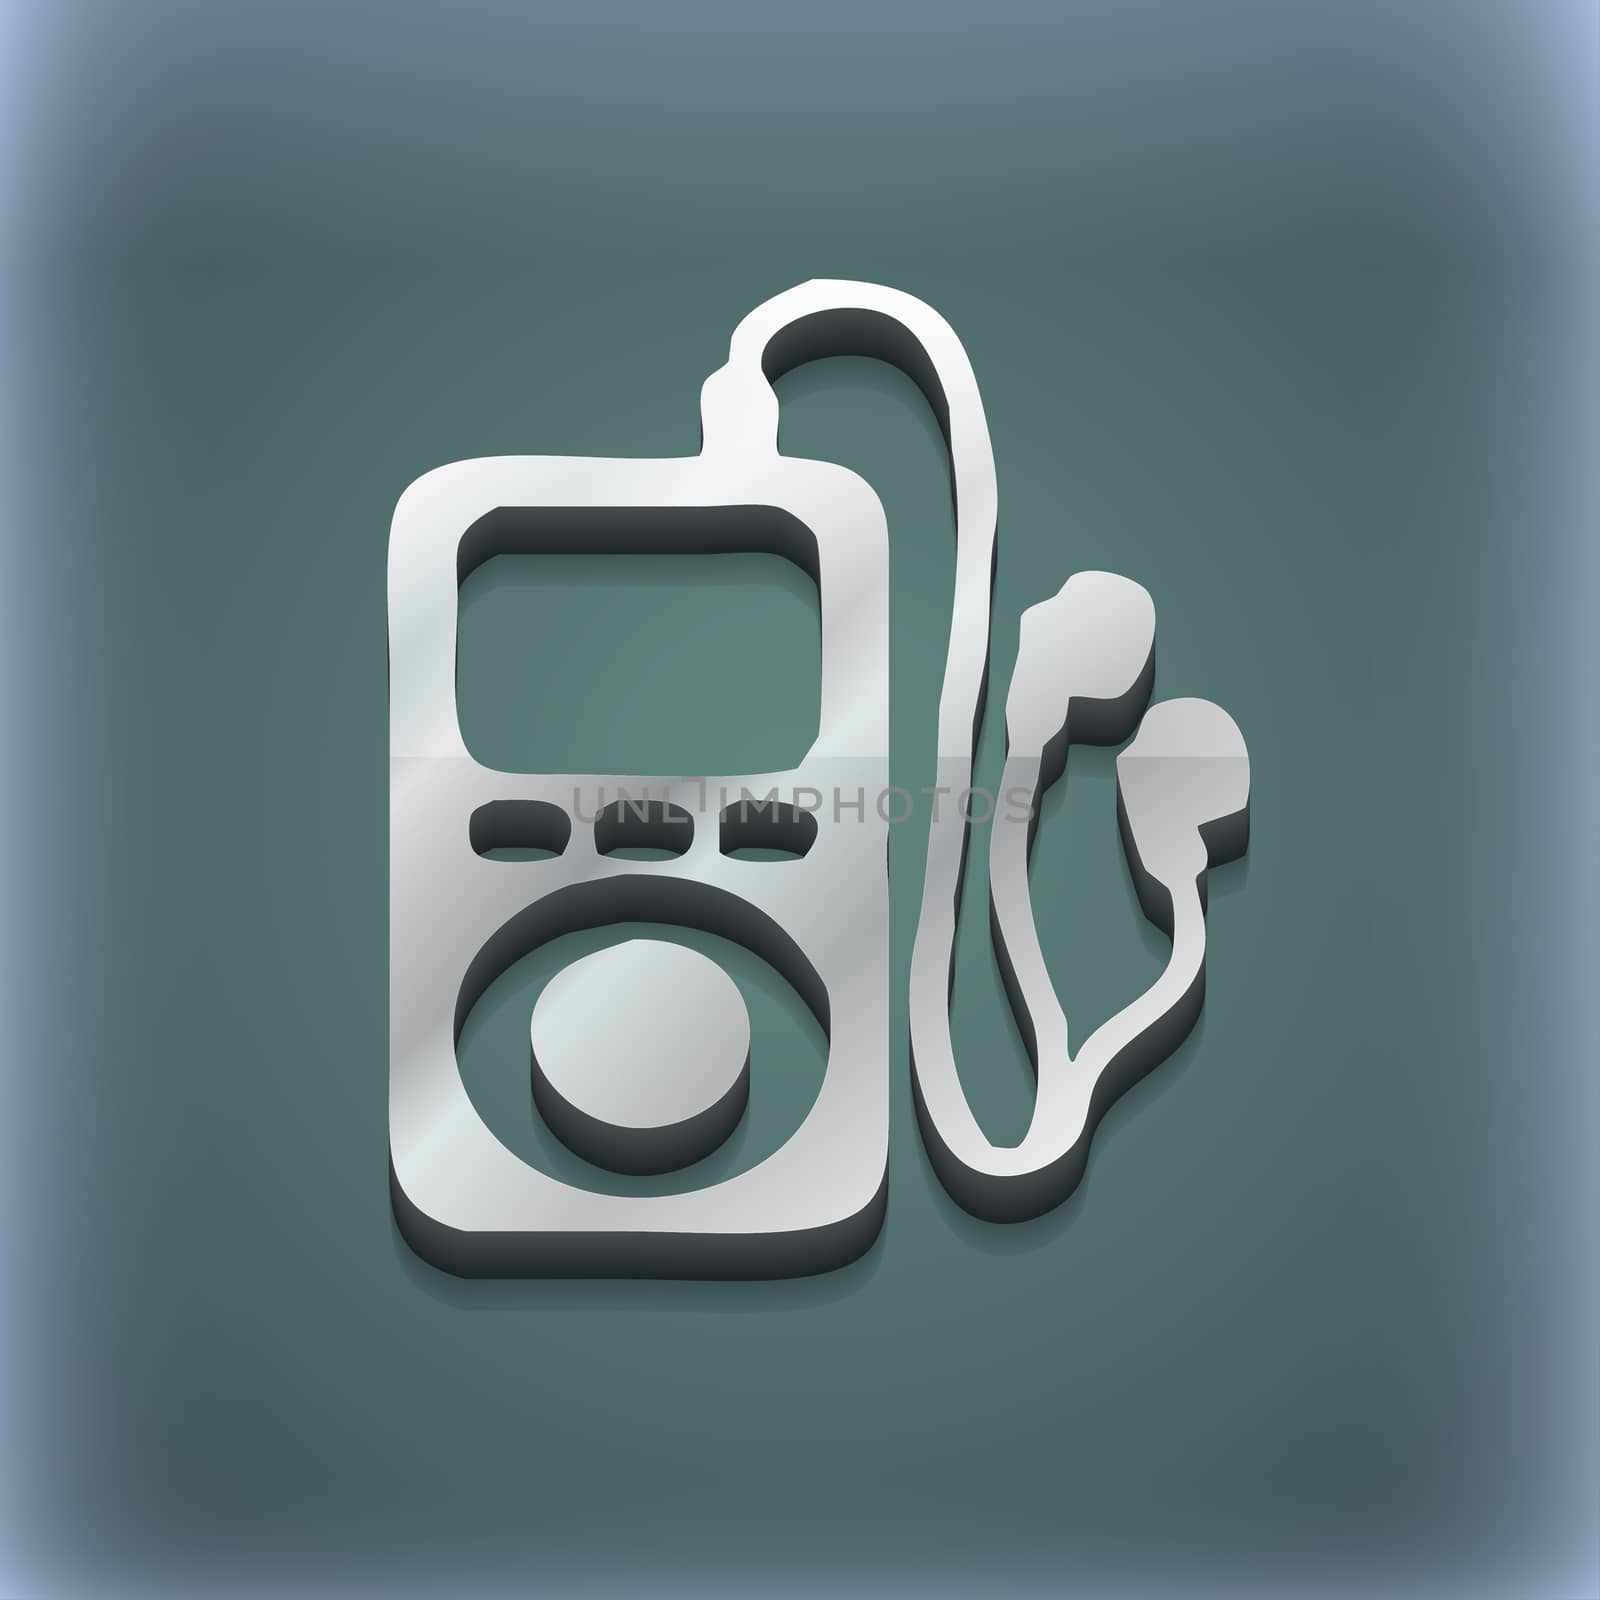 MP3 player, headphones, music icon symbol. 3D style. Trendy, modern design with space for your text illustration. Raster version